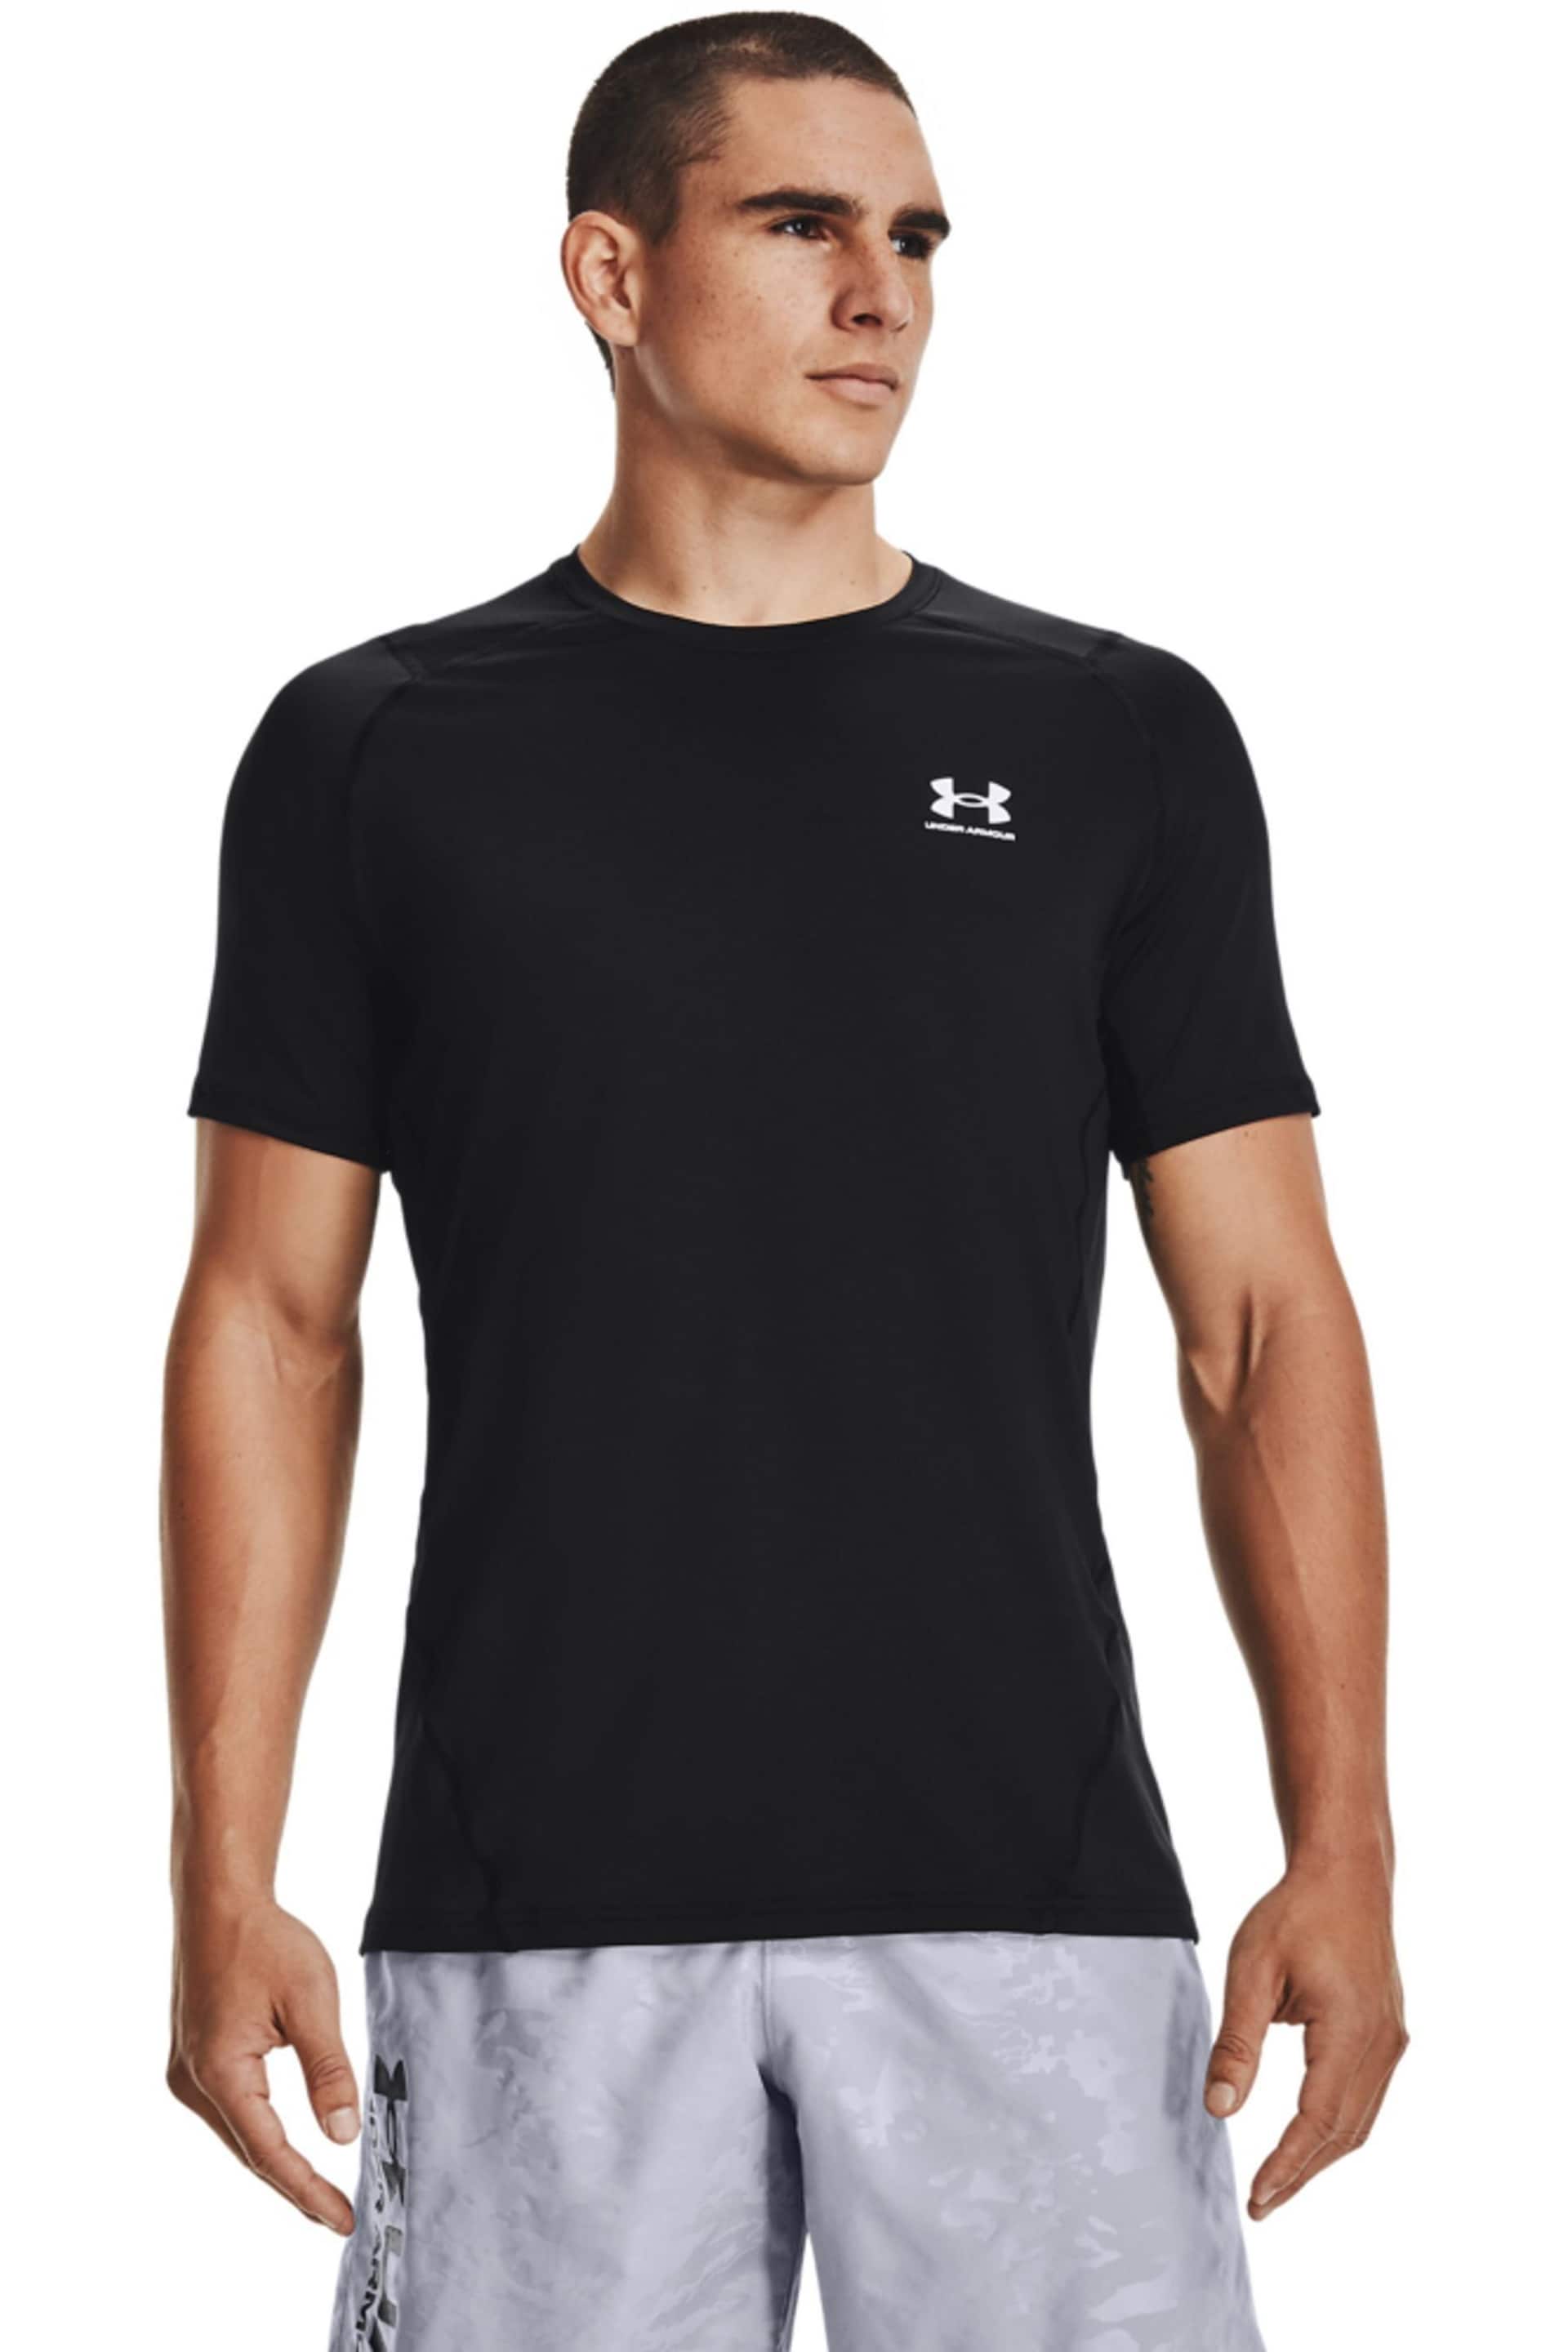 Under Armour Black Heat Gear Fitted T-Shirt - Image 1 of 7